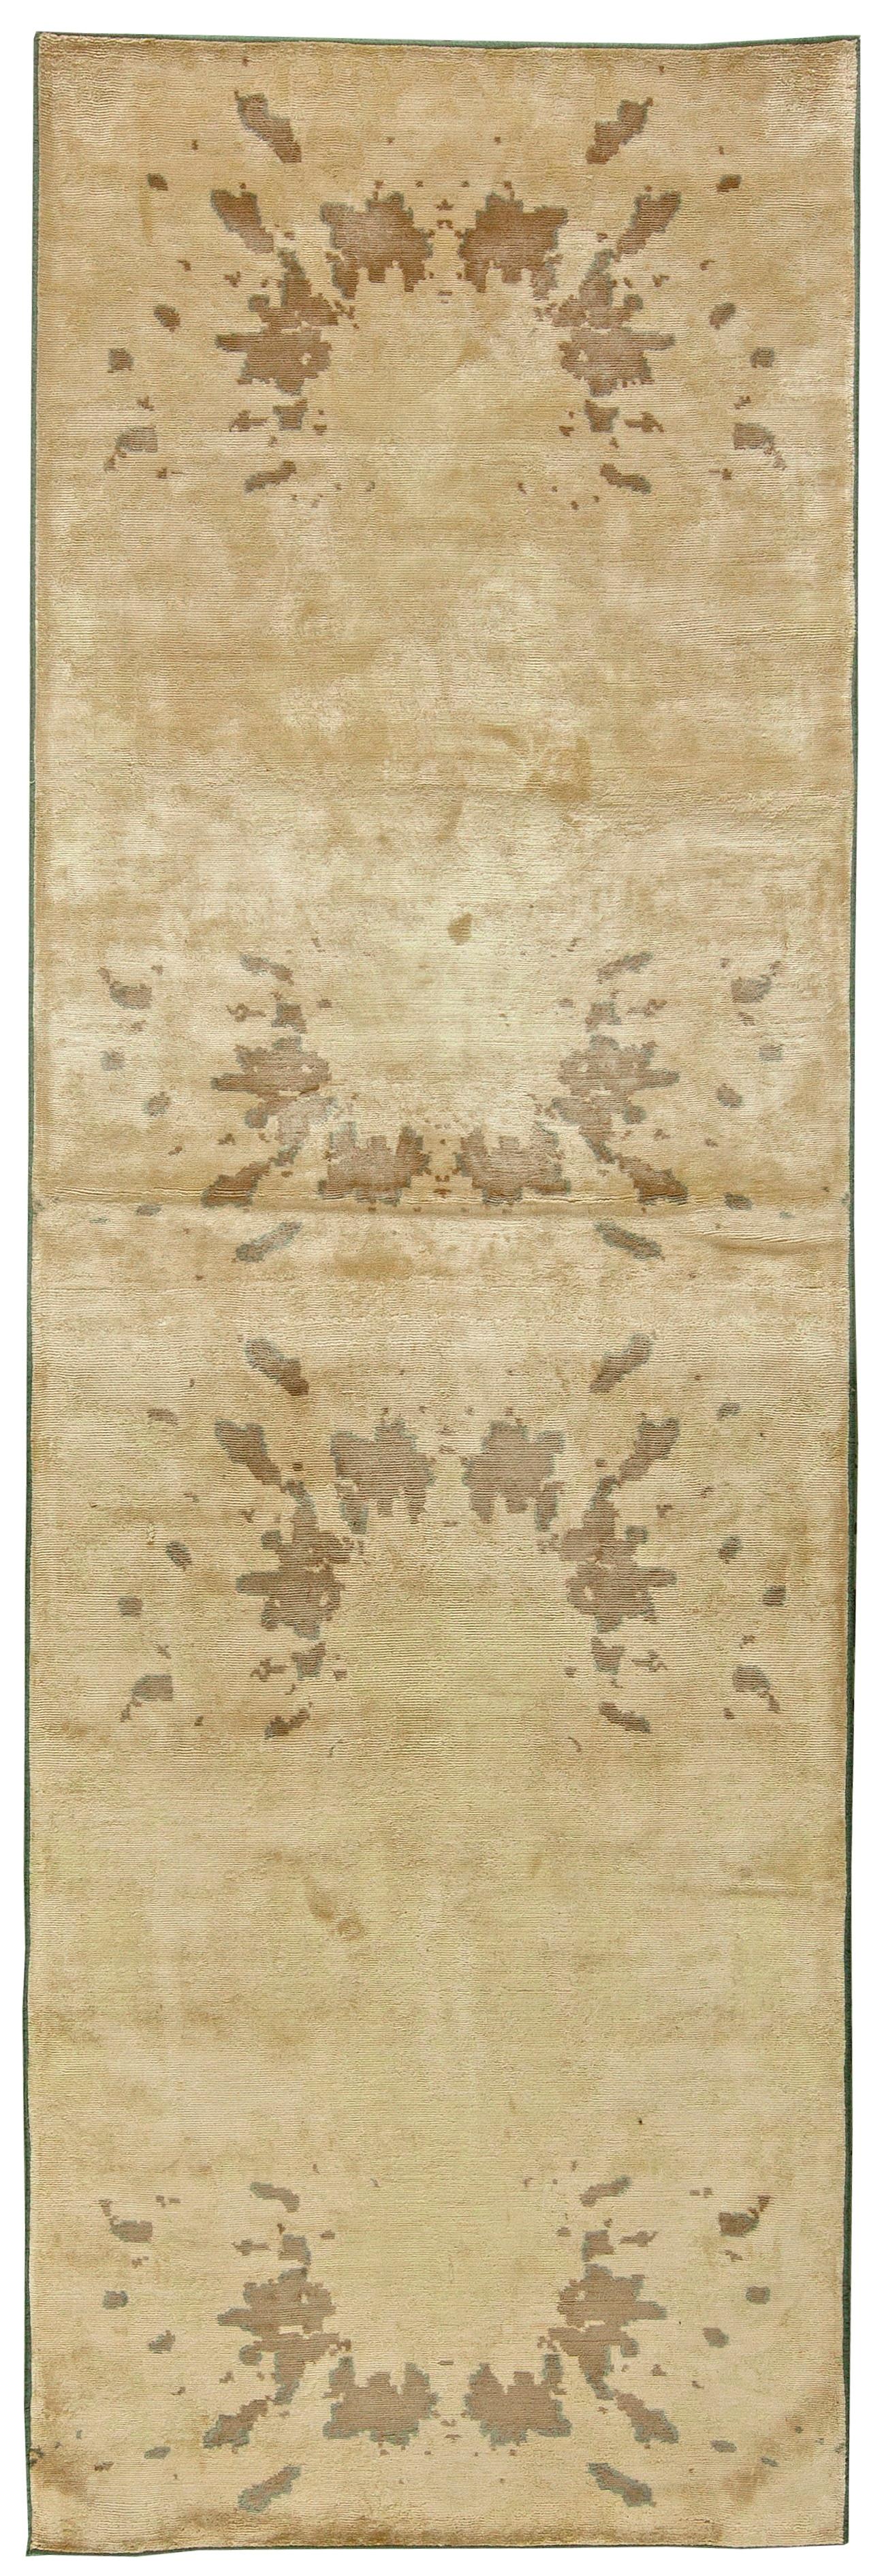 Contemporary Botanic Handmade Silk Rug by Doris Leslie Blau In New Condition For Sale In New York, NY